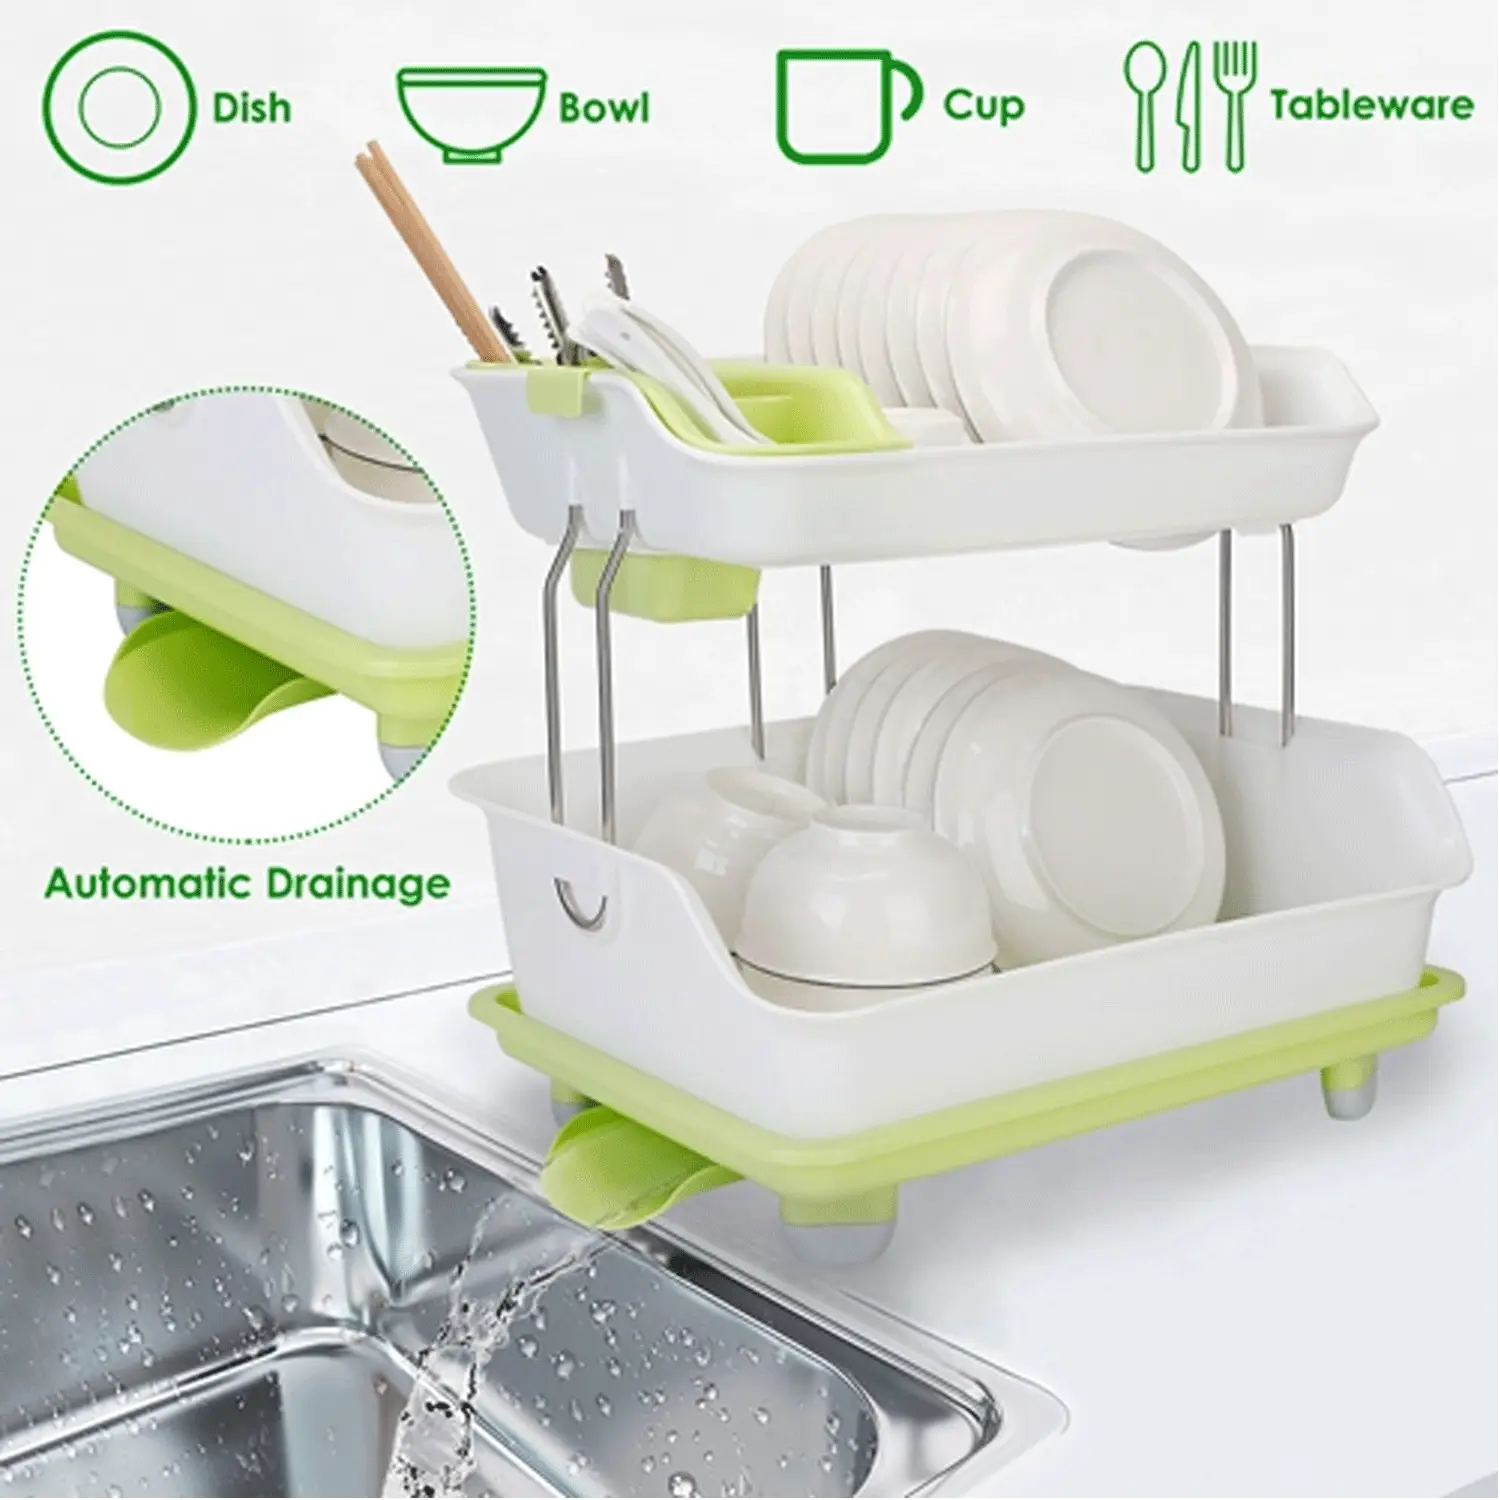 2-Tier Dish-Drying Rack, Cutlery Holder, Drainage Tray